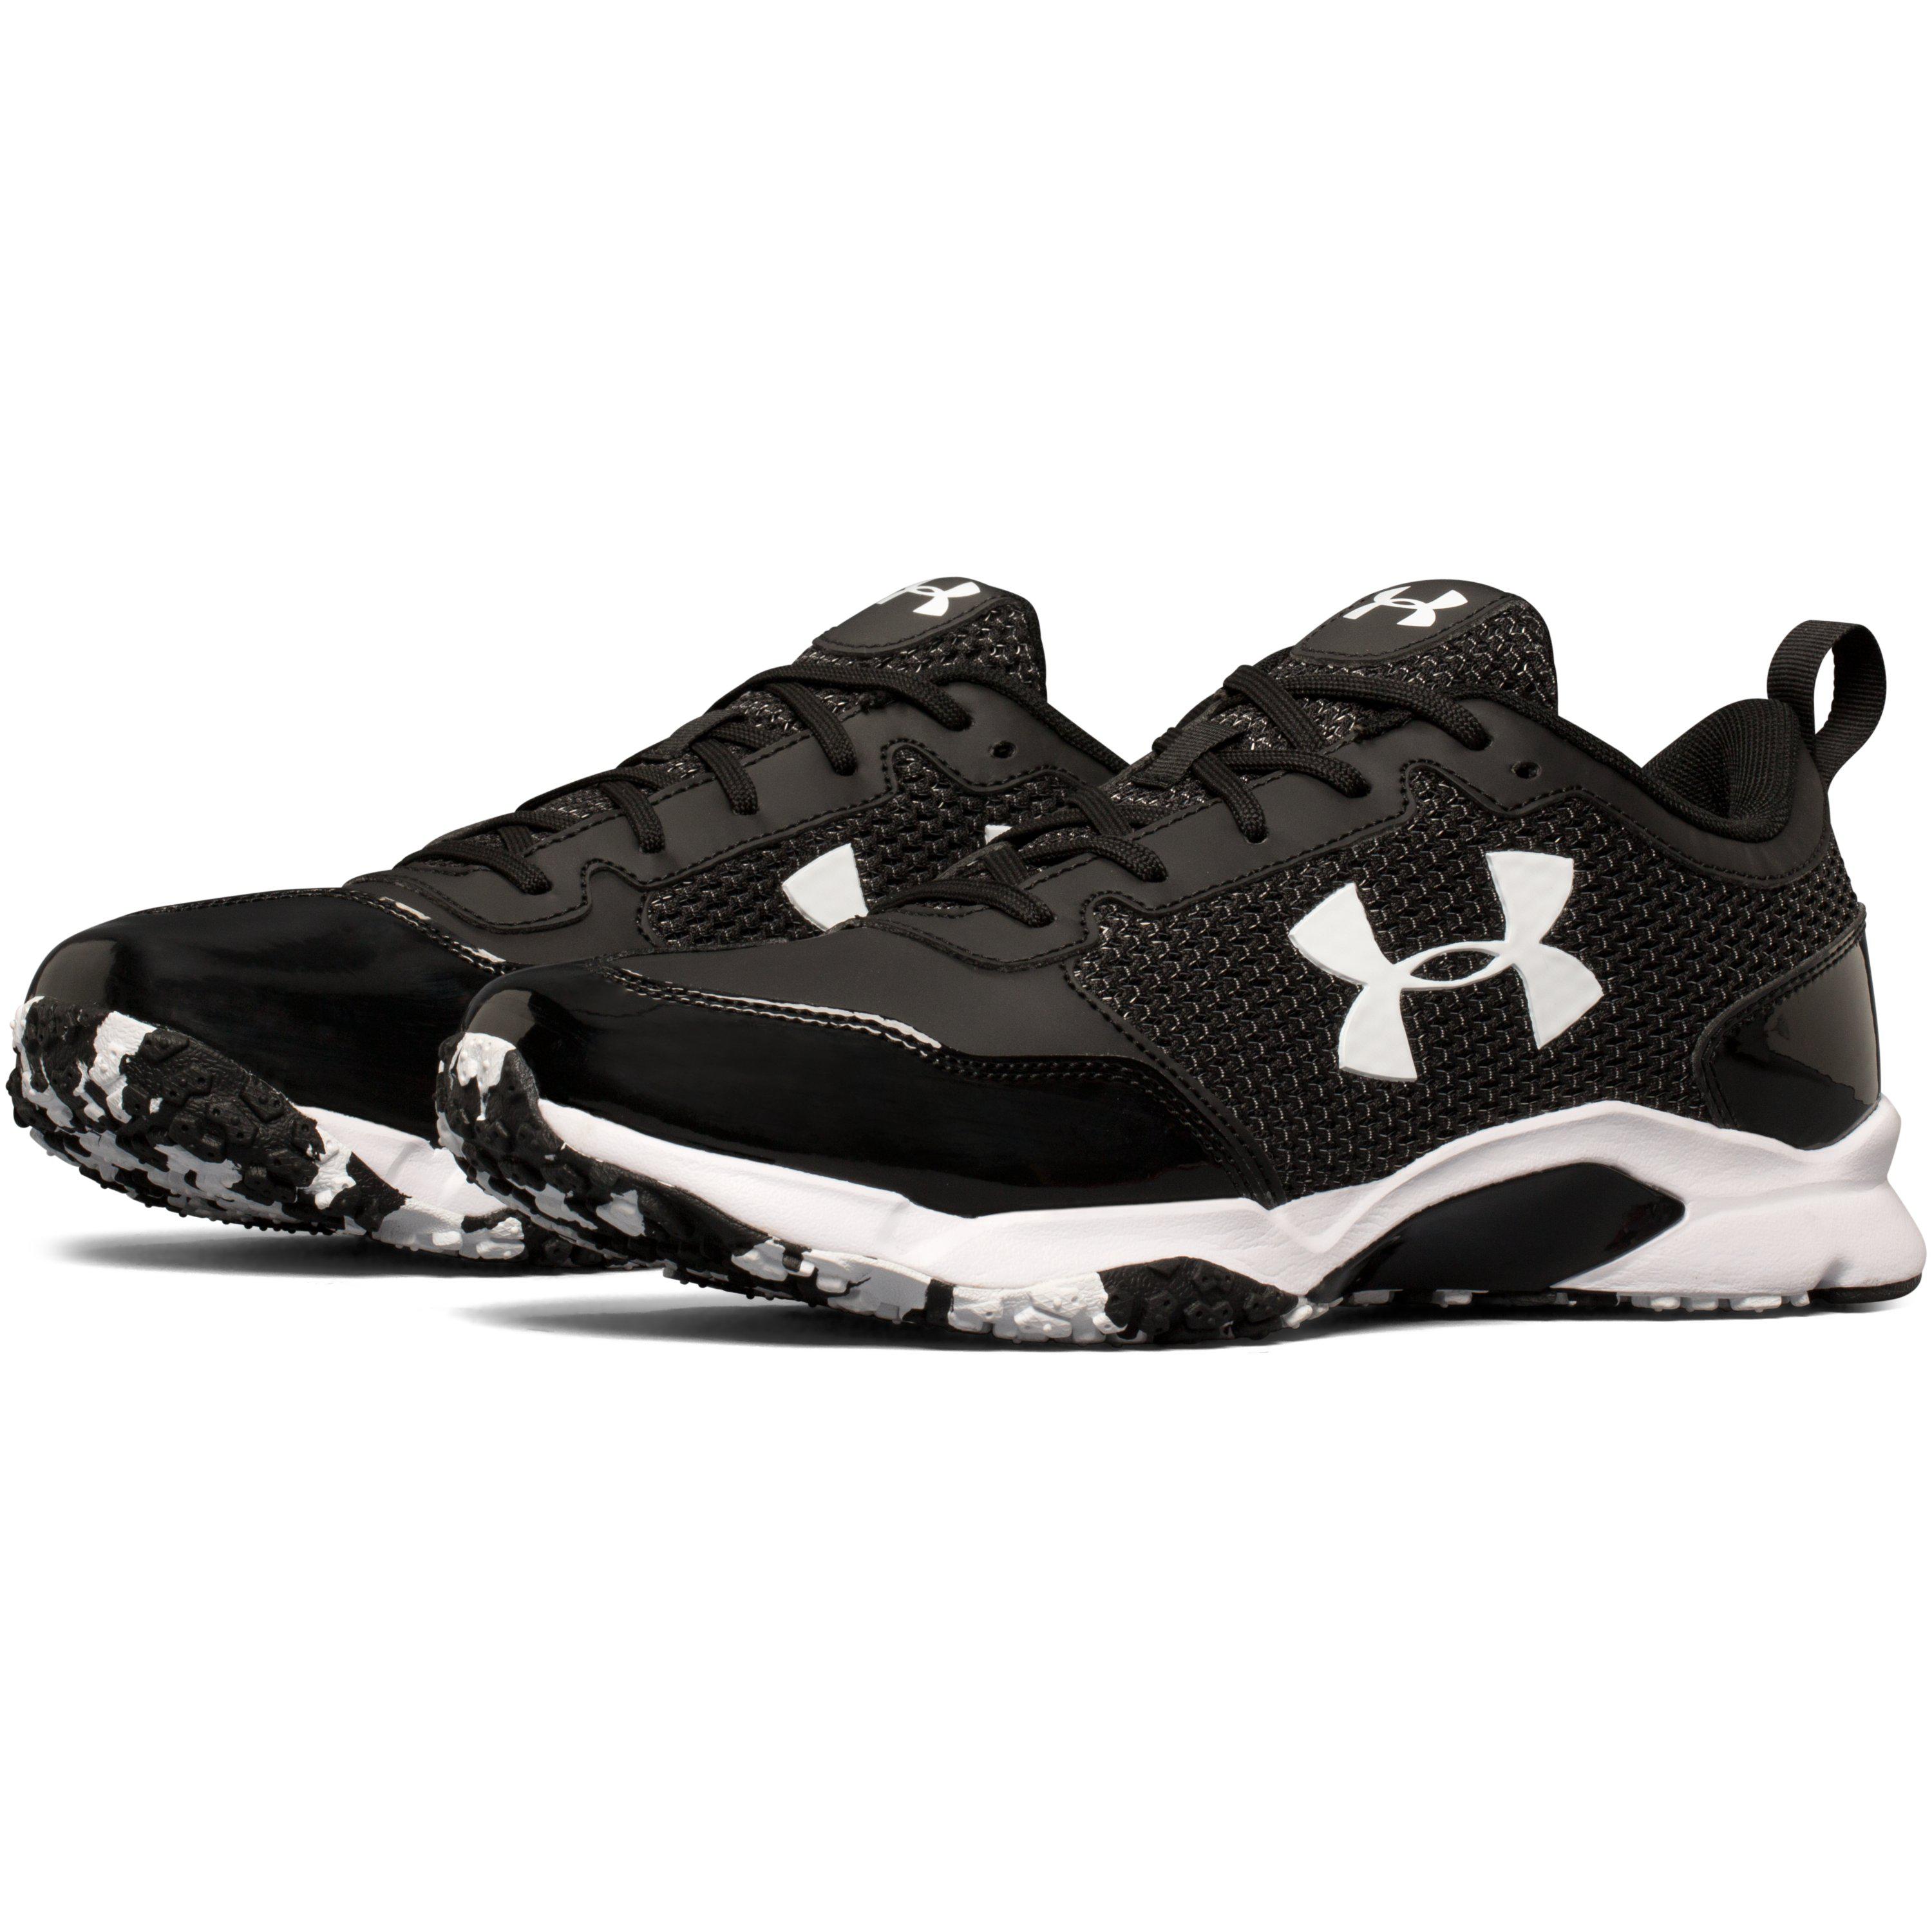 1292146 FREE POSTAGE Under Armour Men's Ultimate Turf Trainer New Black/Black 